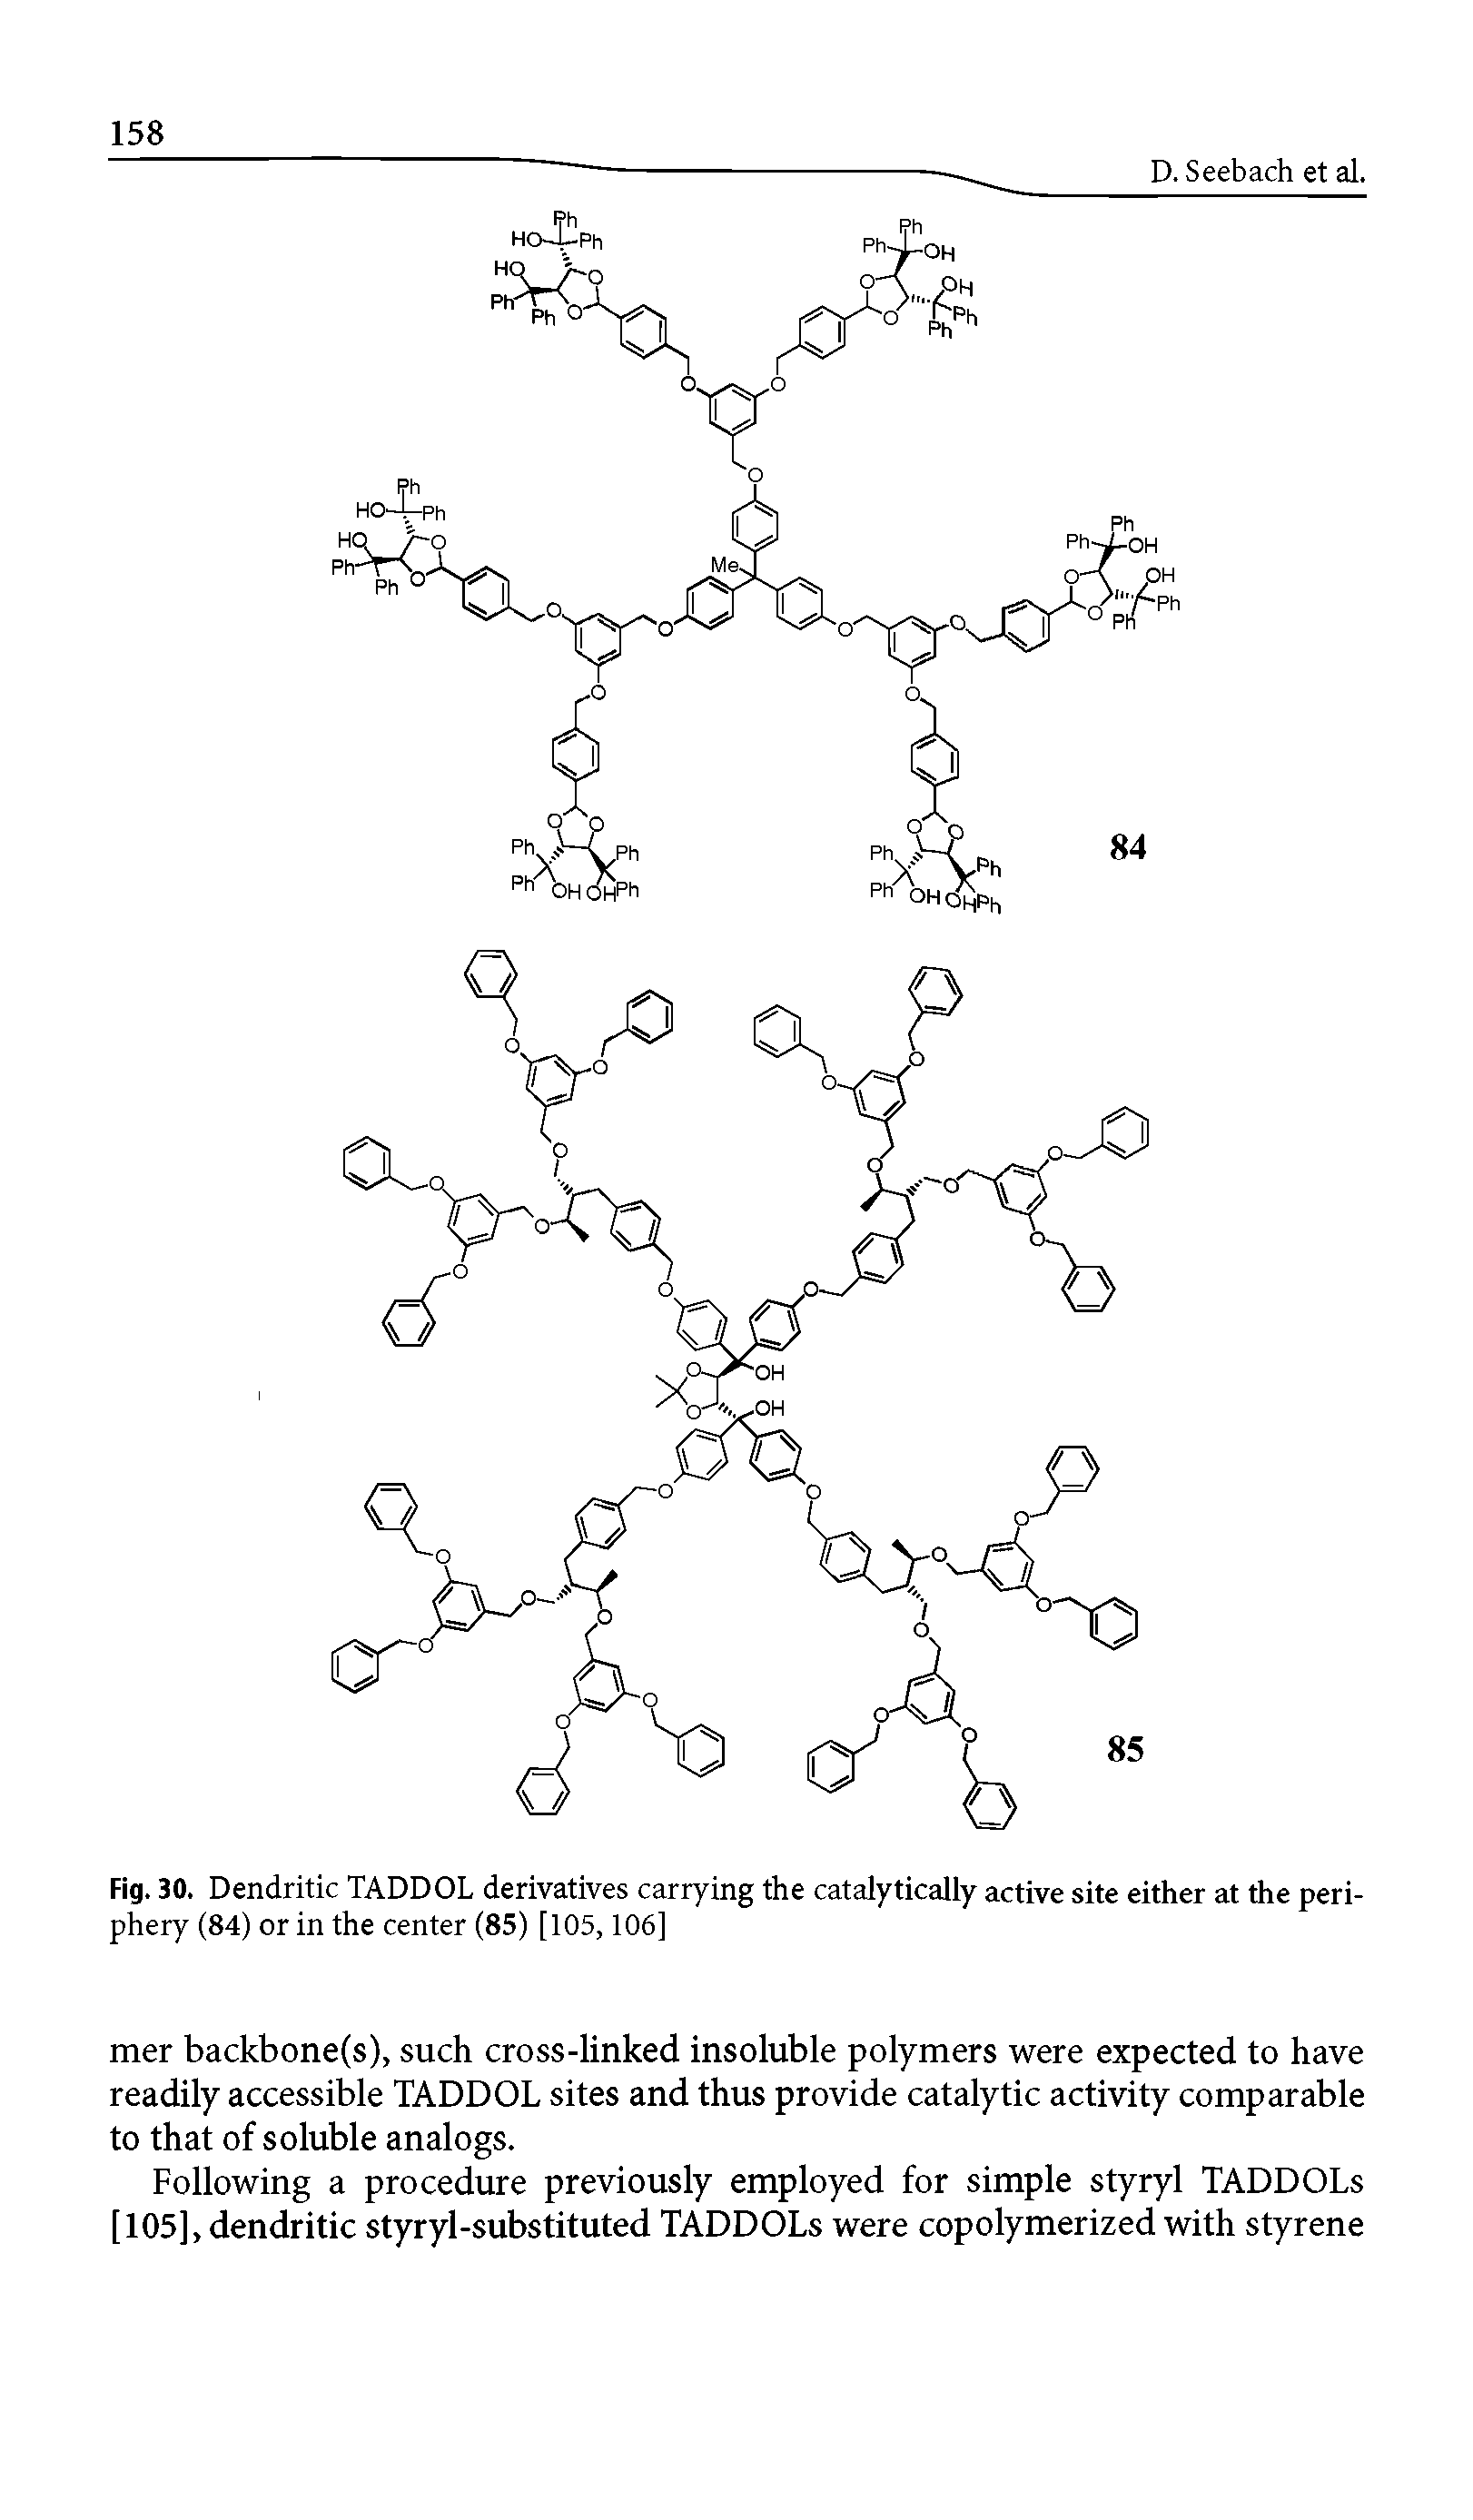 Fig. 30. Dendritic TADDOL derivatives carrying the catalytically active site either at the periphery (84) or in the center (85) [105,106]...